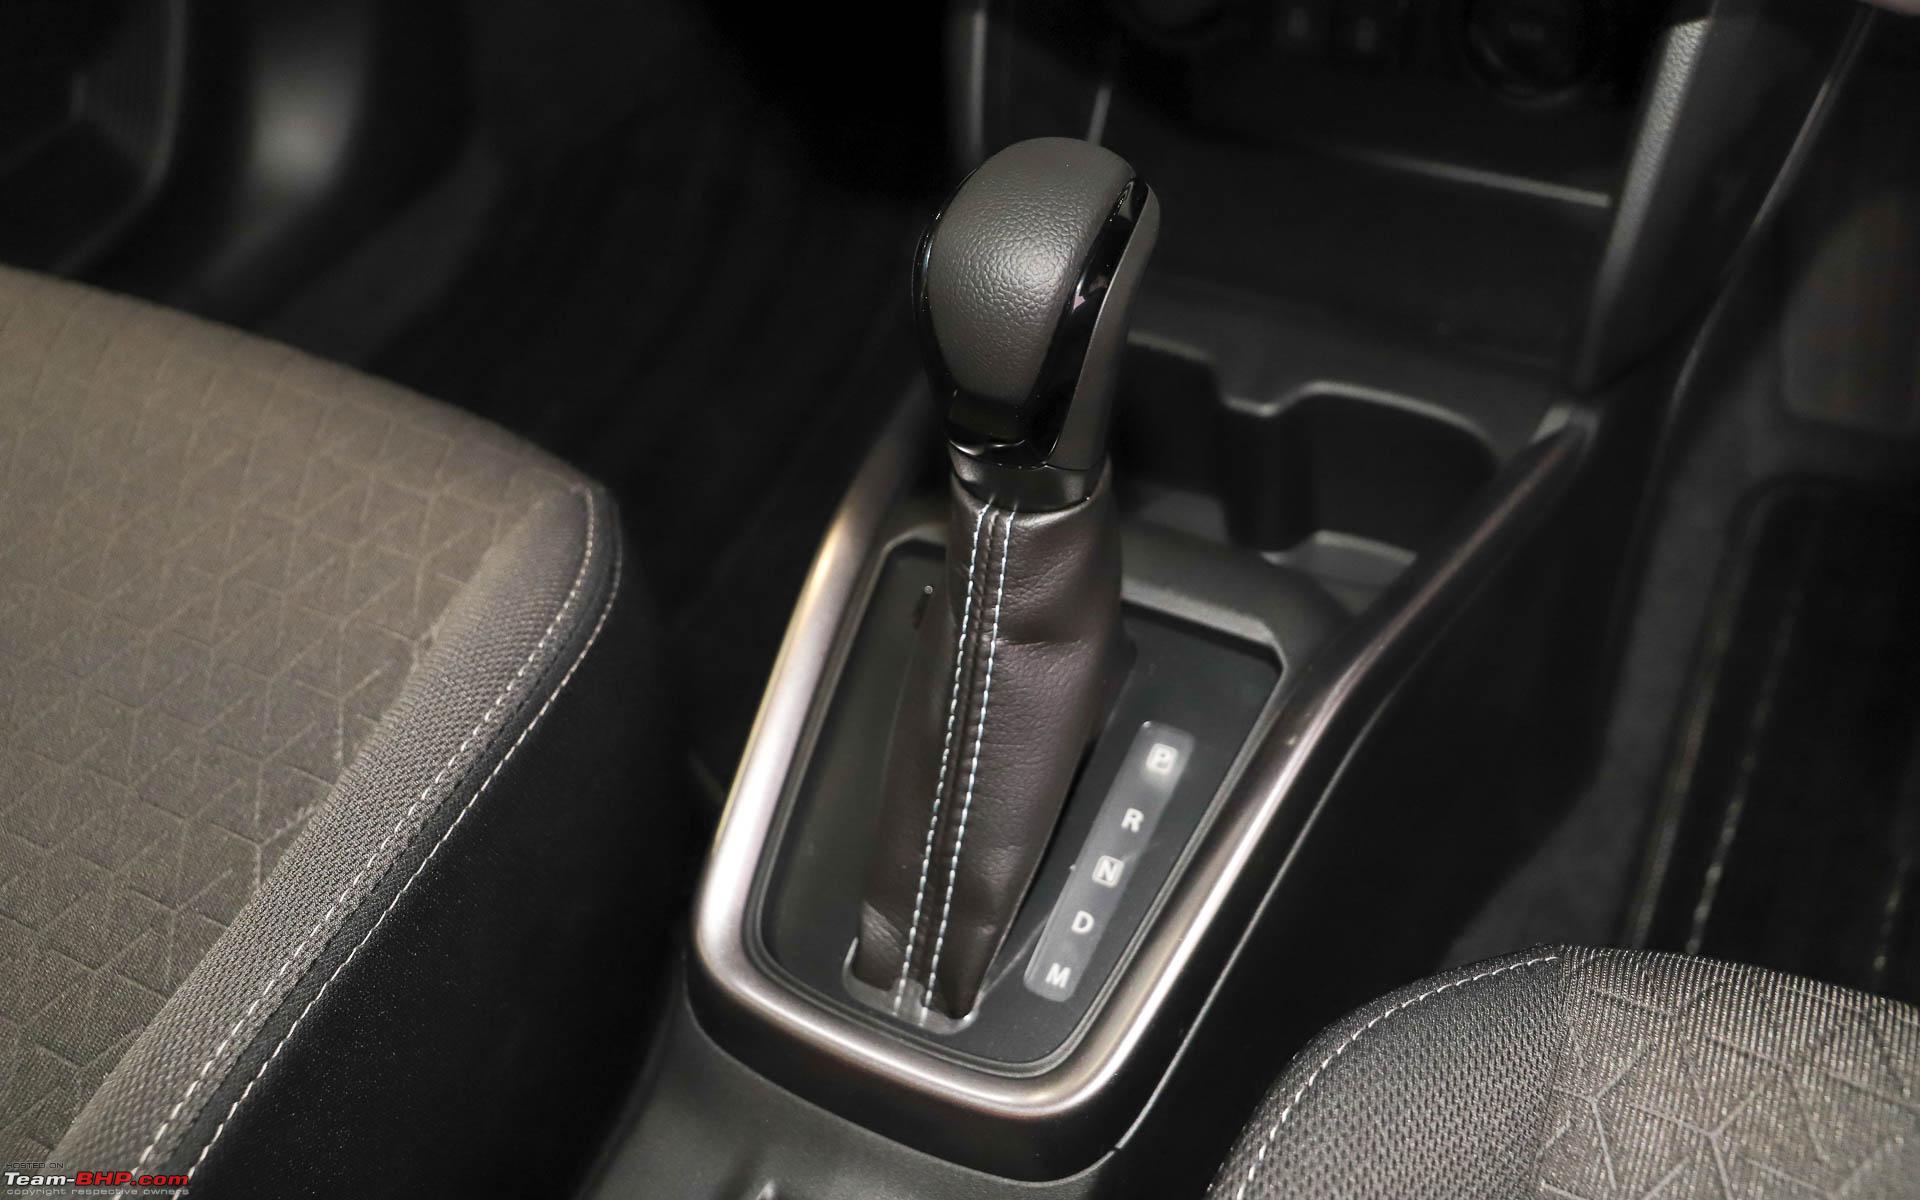 Swift gets Auto Gear Shift (AGS) option for top petrol, diesel variants -  BusinessToday